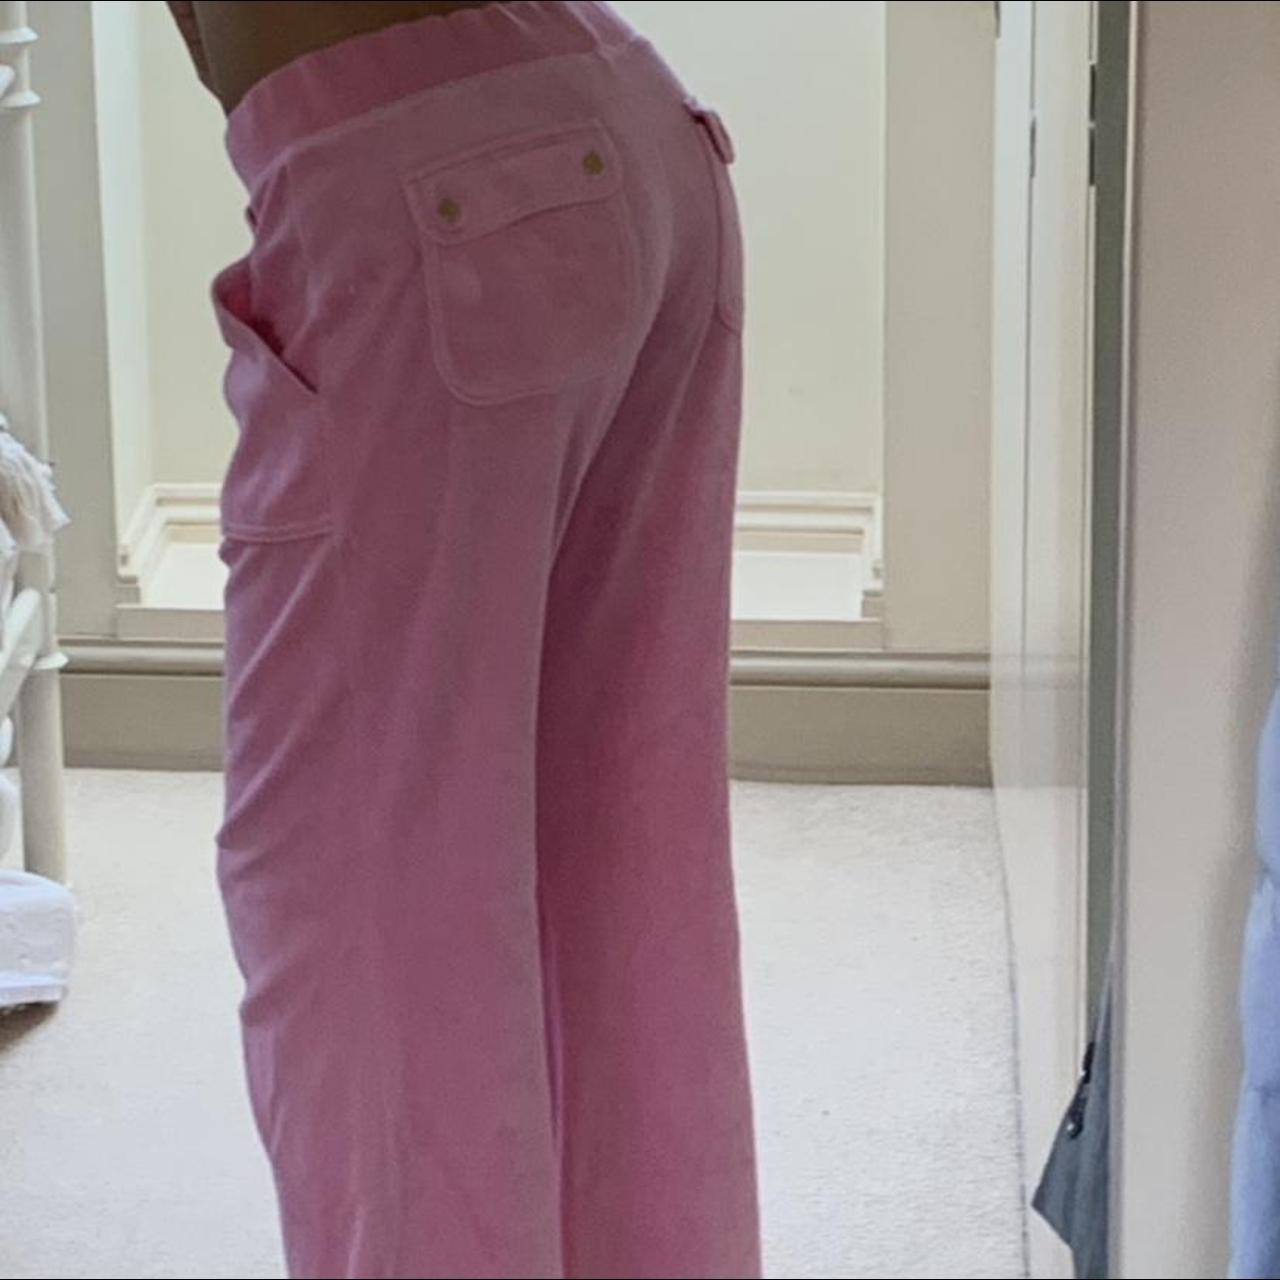 Stunning juicy couture trousers in pink Bought for:... - Depop